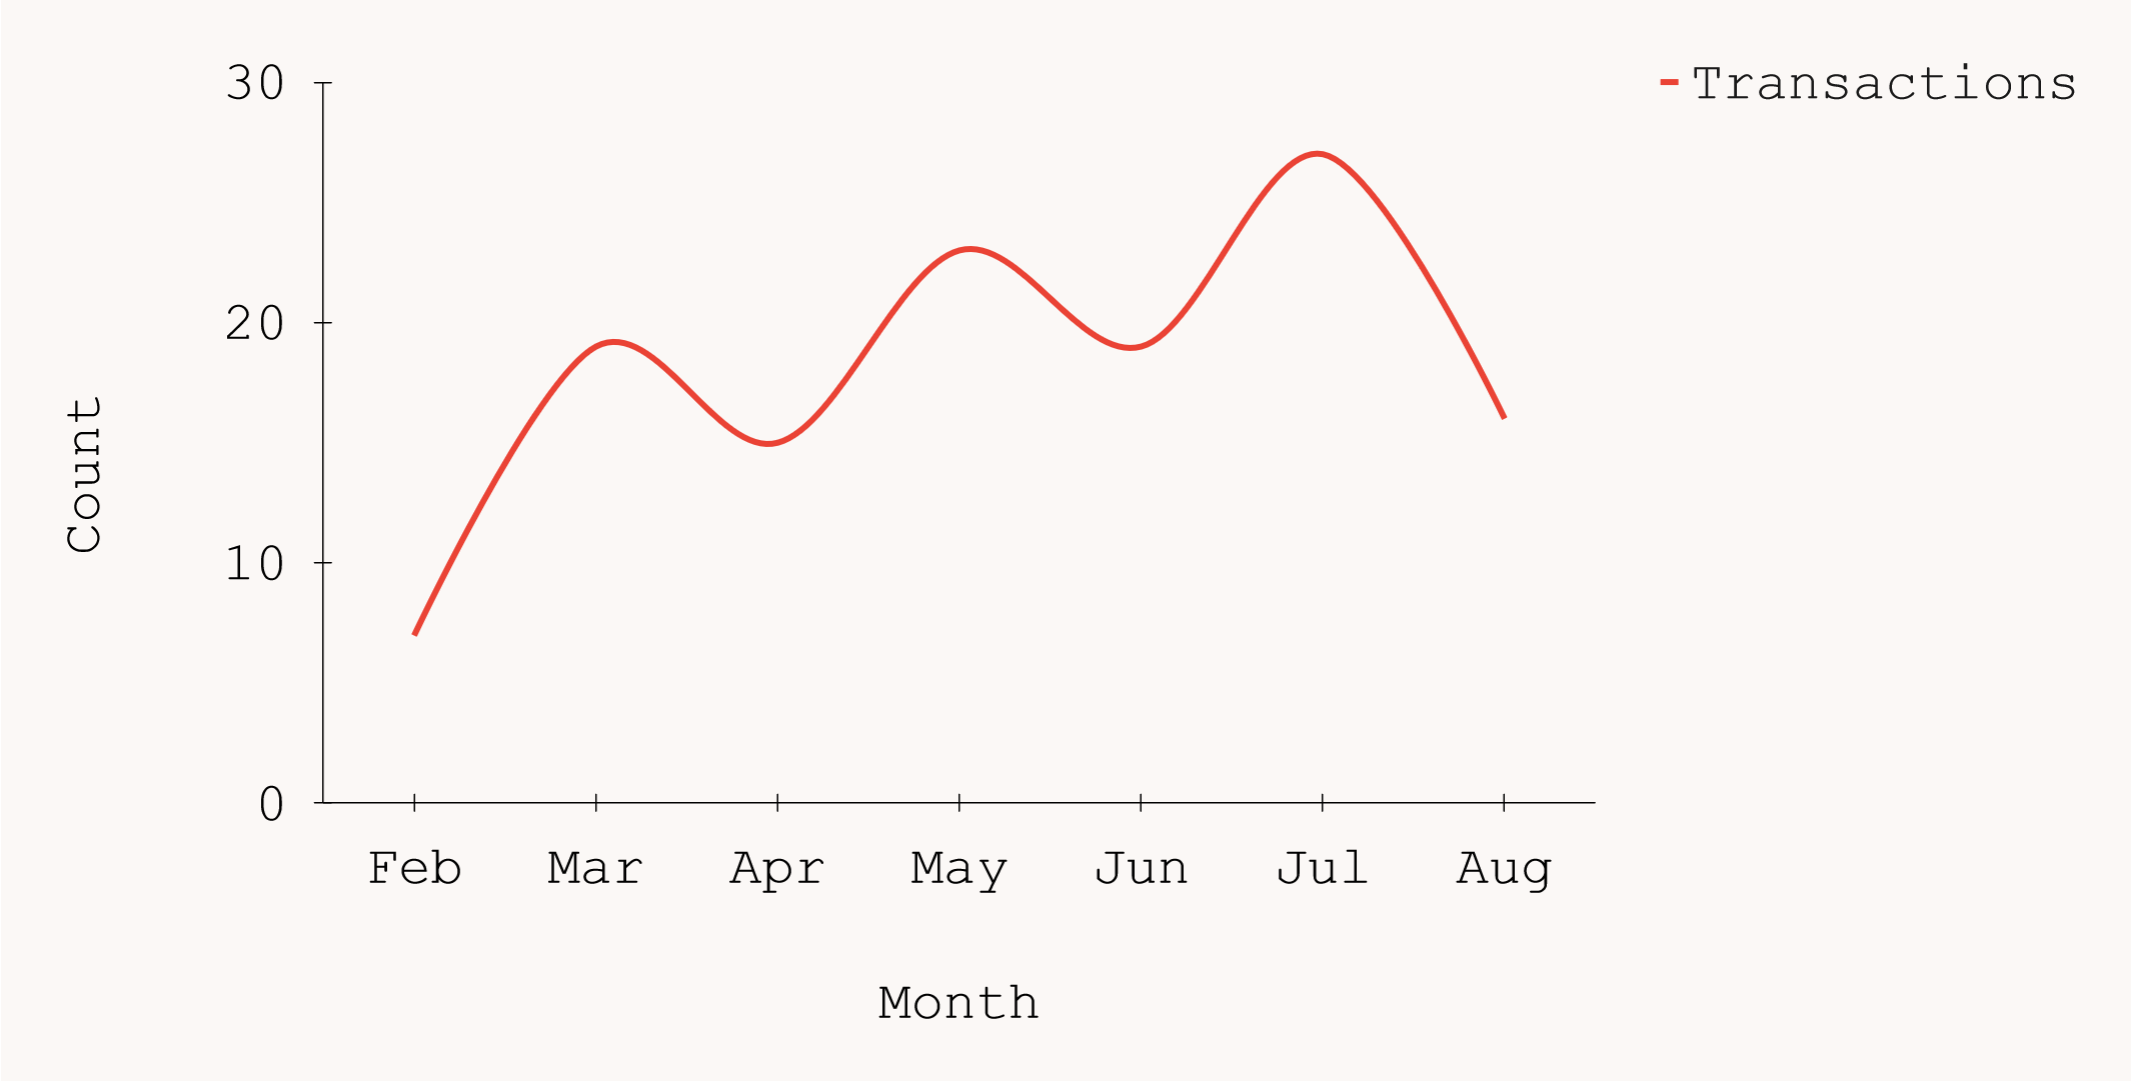 A graph of my sabbatical transactions by month.